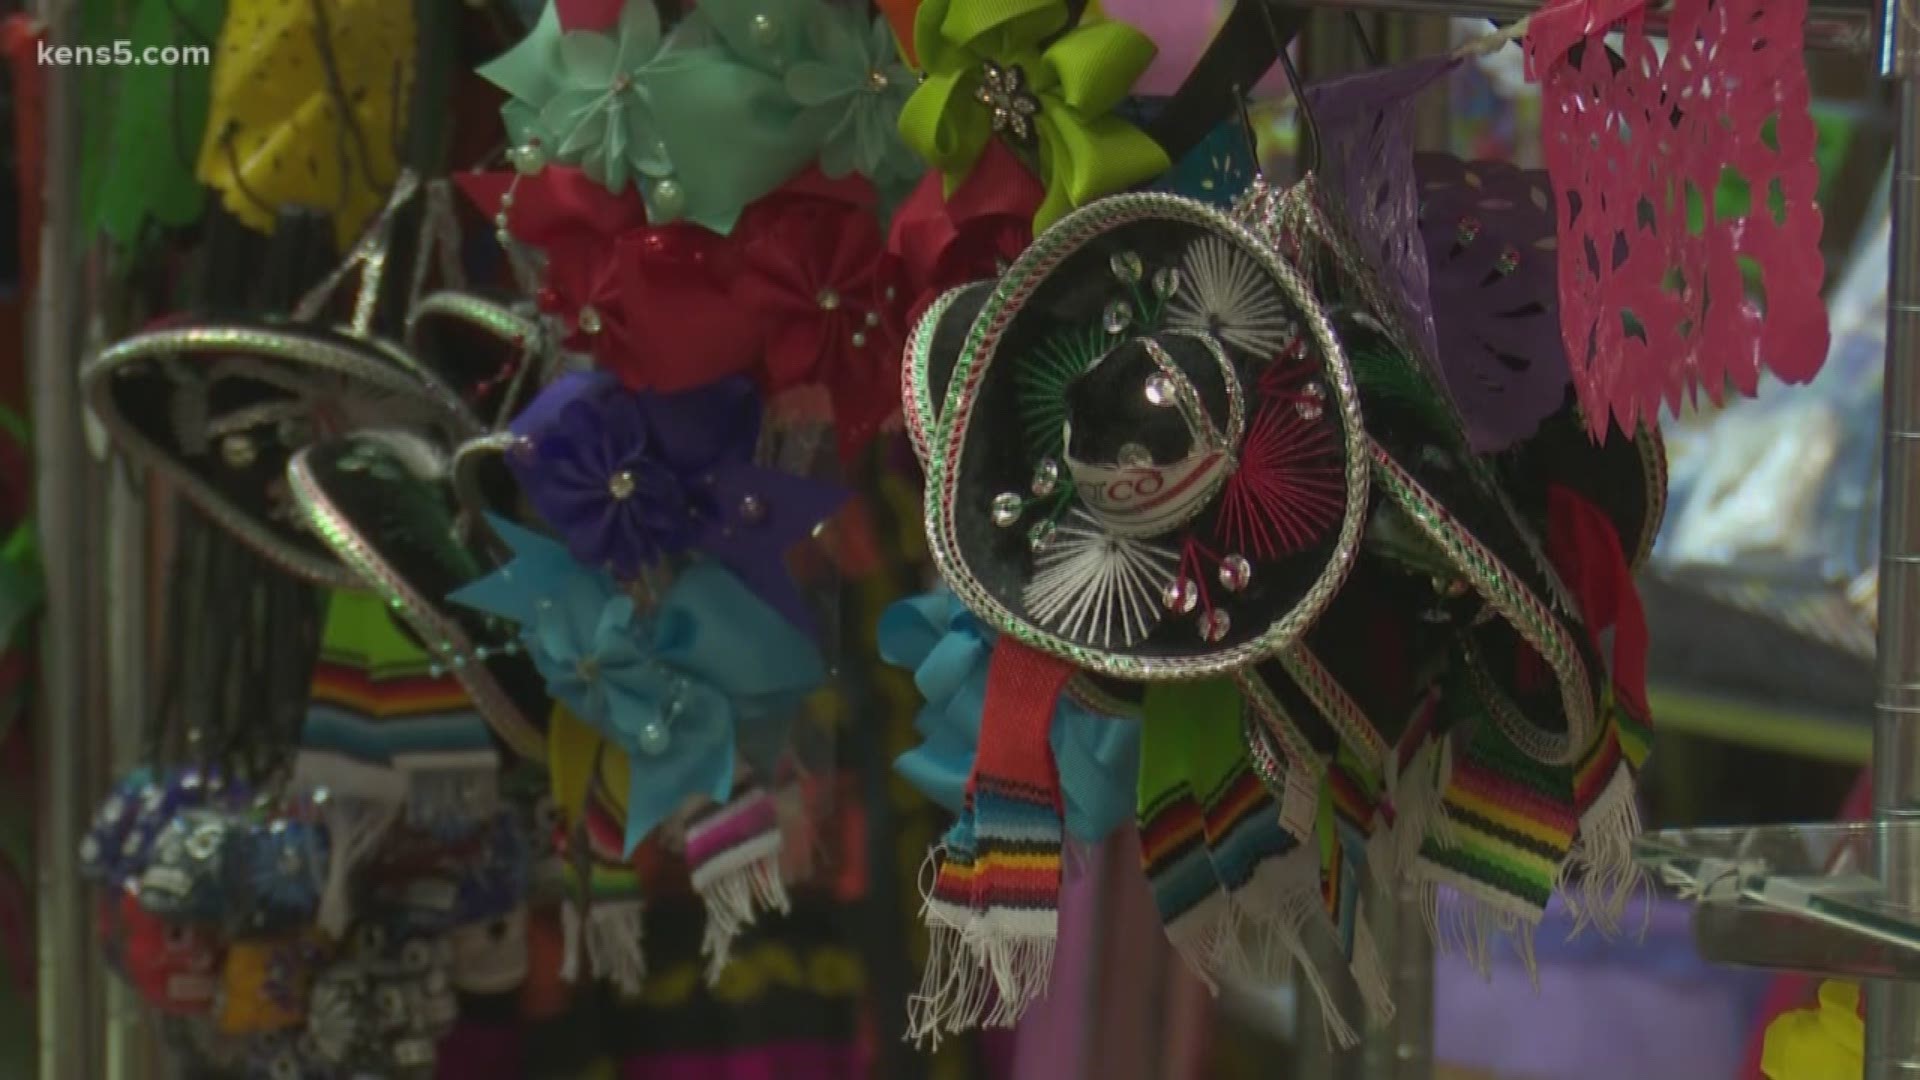 Fiesta is right around the corner, and as San Antonio gears up we sent reporter Aaron Wright down to learn the do's and don'ts of our city's biggest annual party.